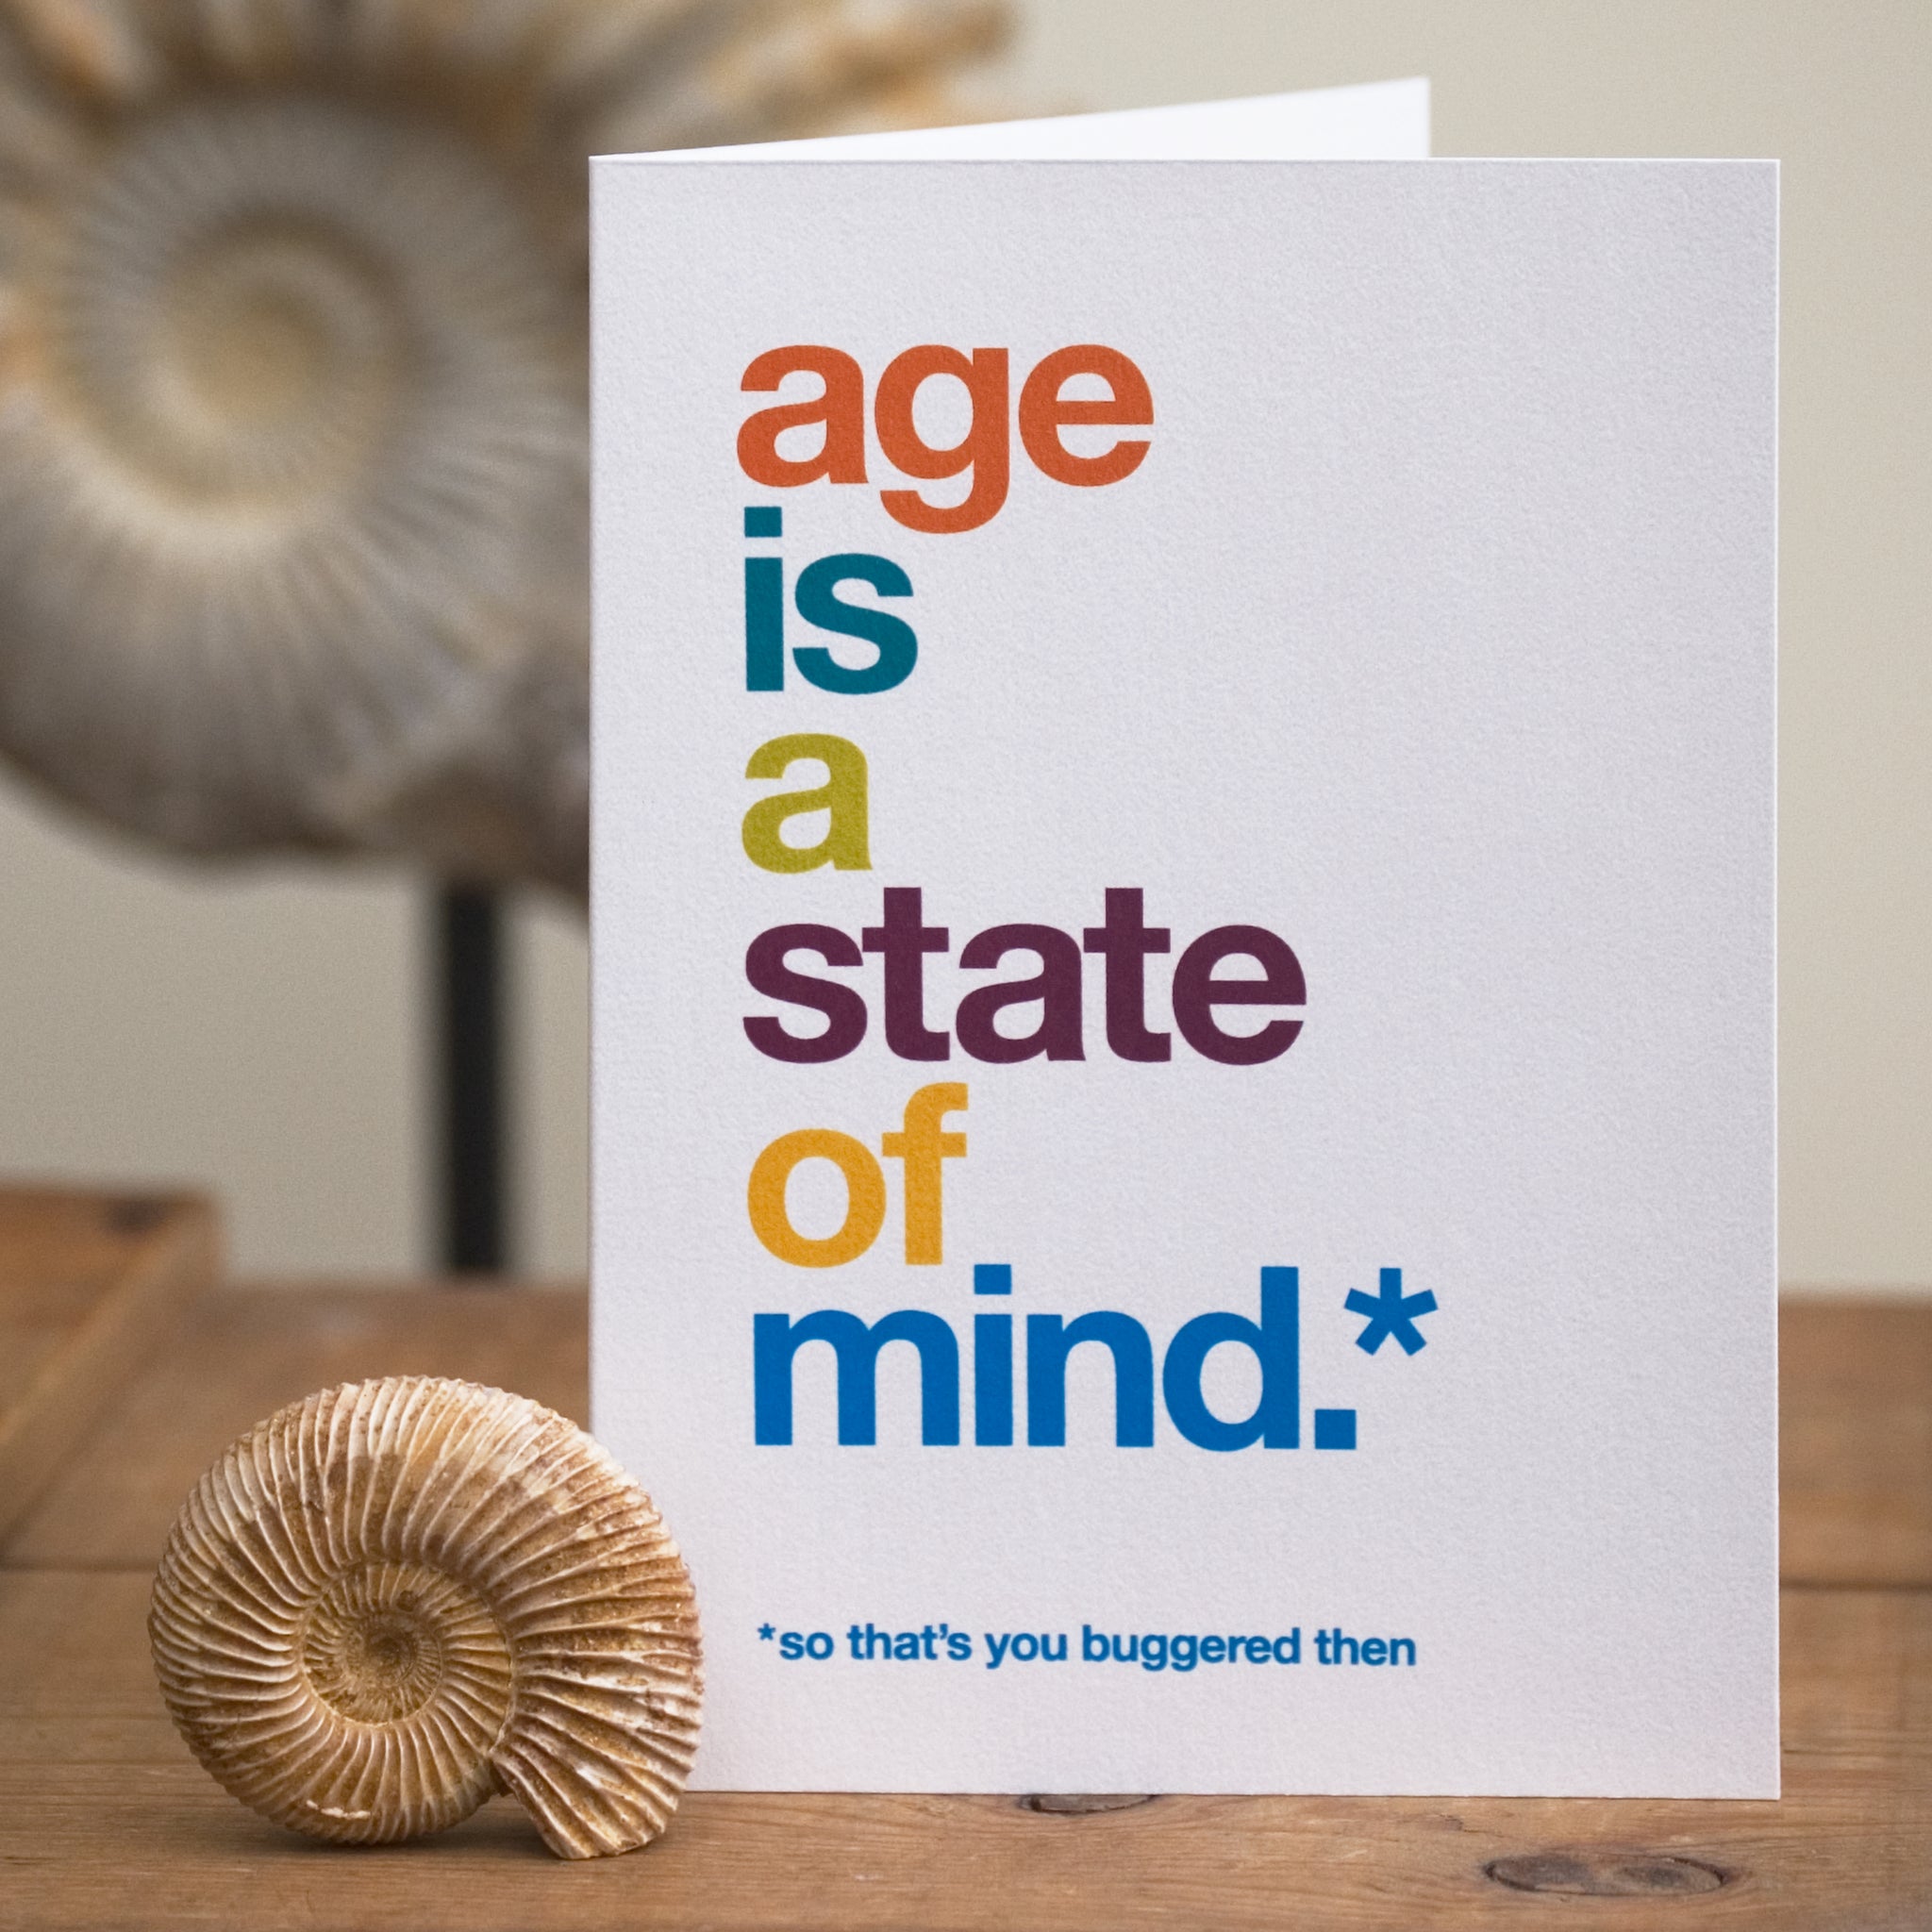 A funny birthday card saying 'age is a state of mind, so that’s you buggered then'.